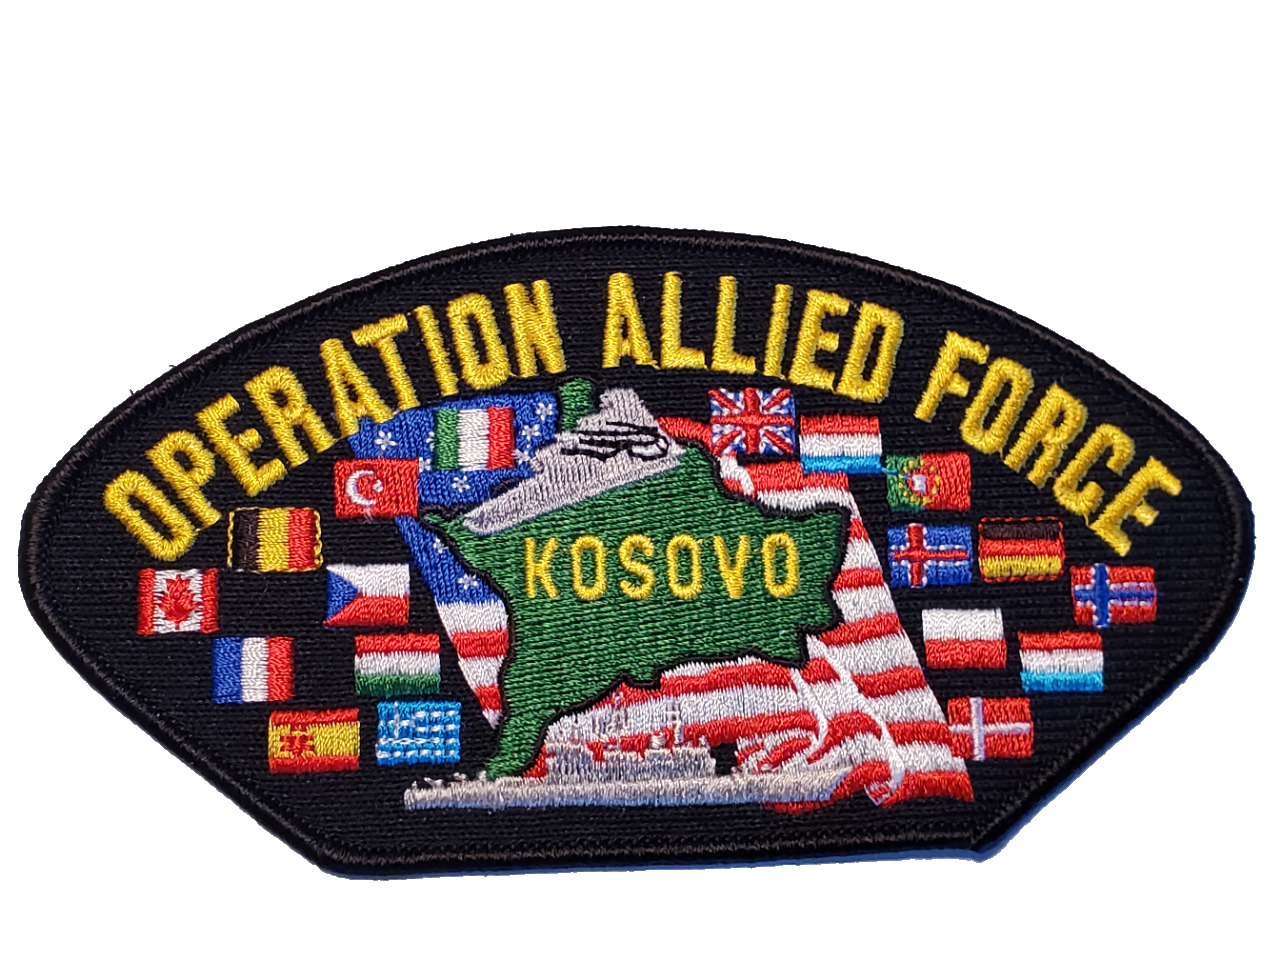 Operation Allied Force Kosovo Patch - Great Color - Veteran Owned Business